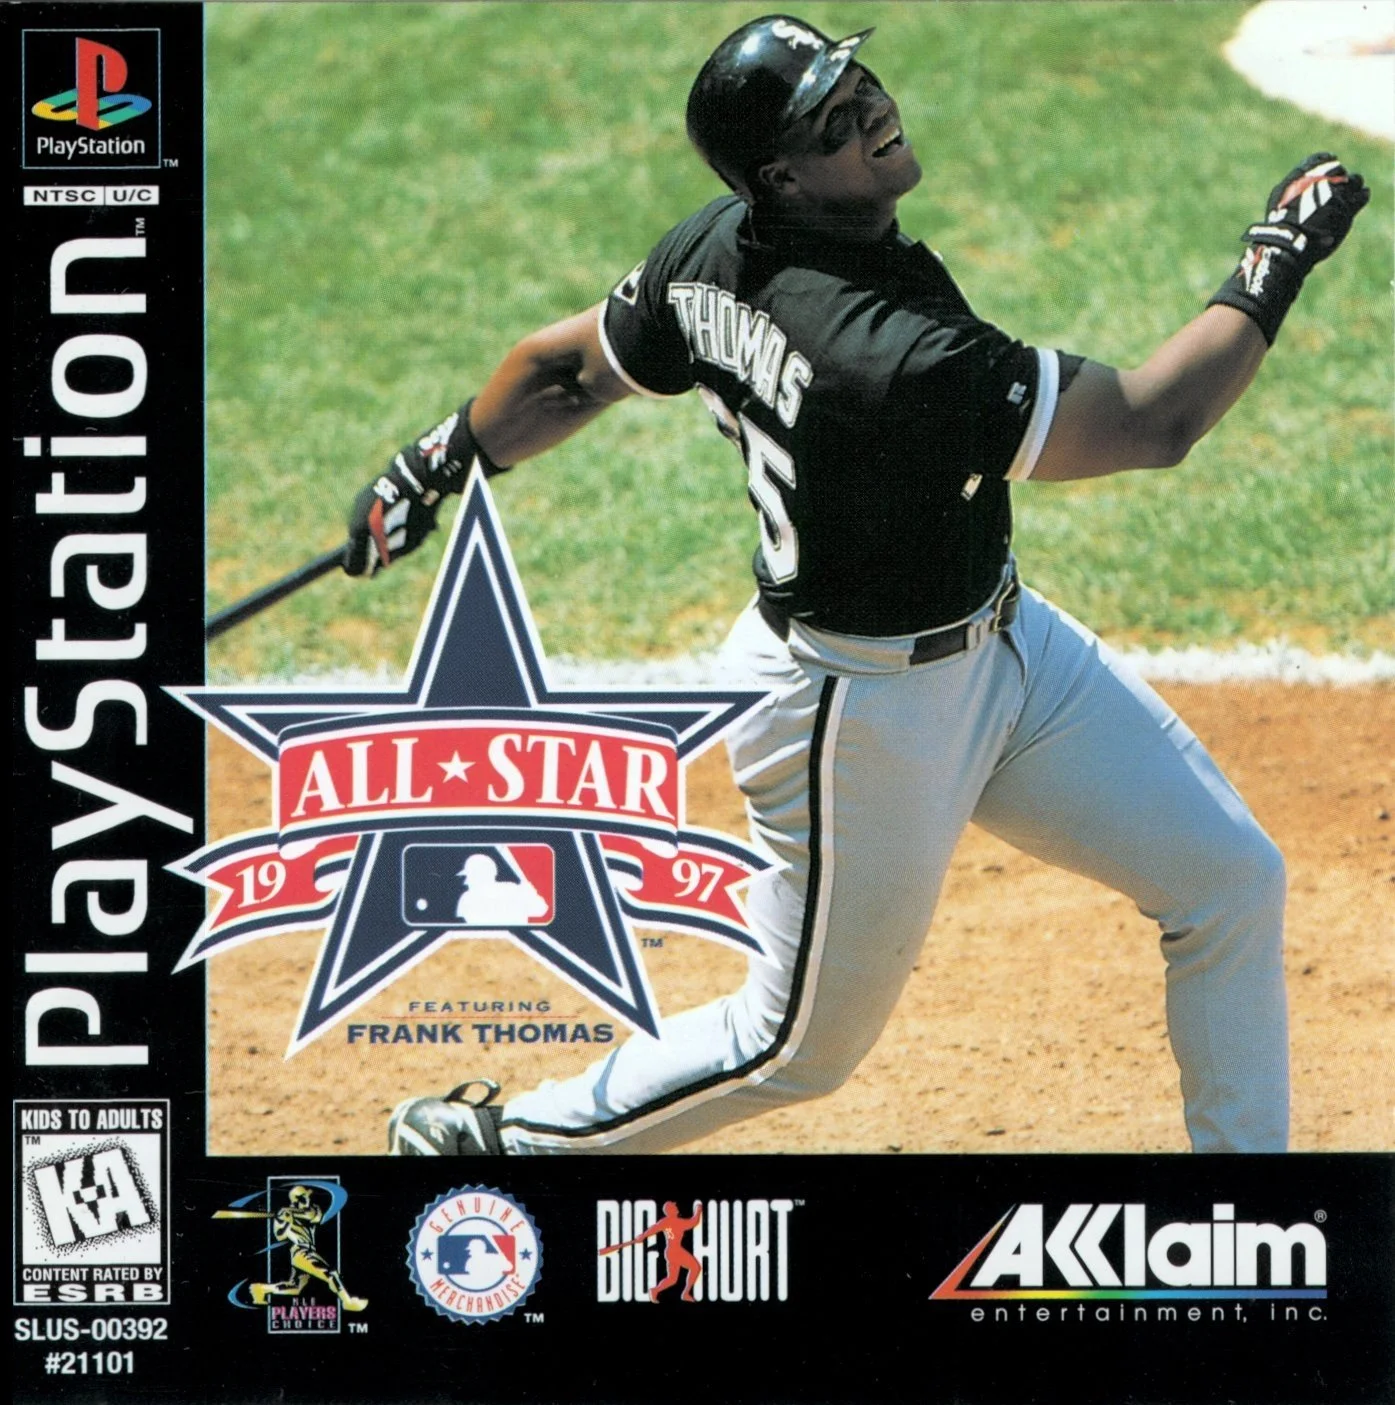 All-Star 1997 Featuring Frank Thomas